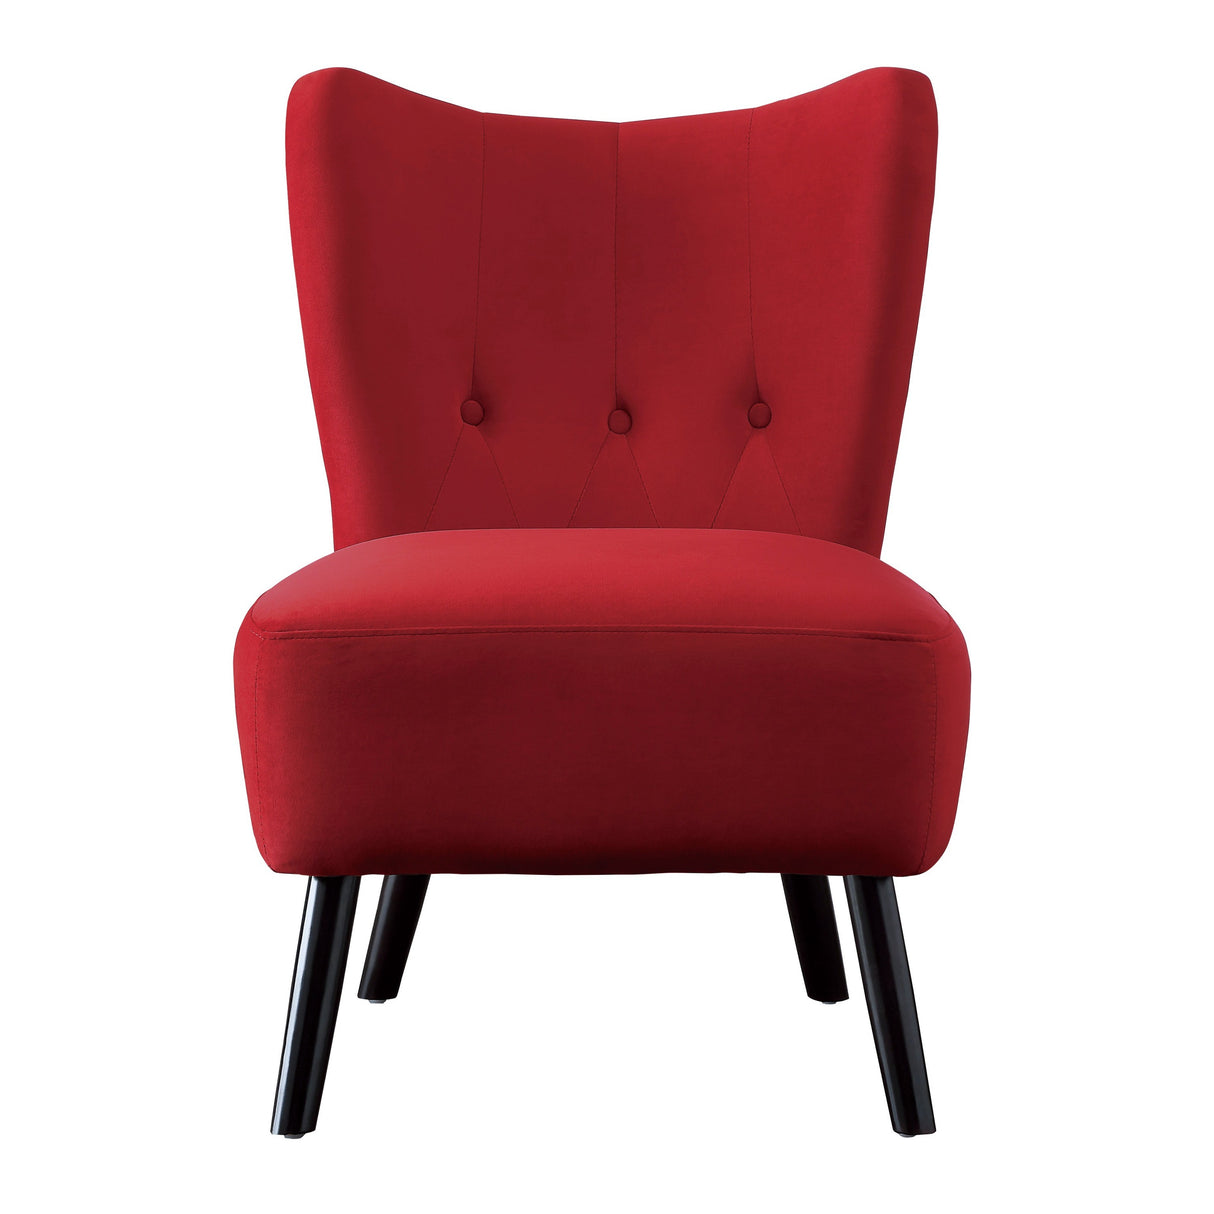 Unique Style Red Velvet Covering Accent Chair Button-Tufted Back Brown Finish Wood Legs Modern Home Furniture - Home Elegance USA